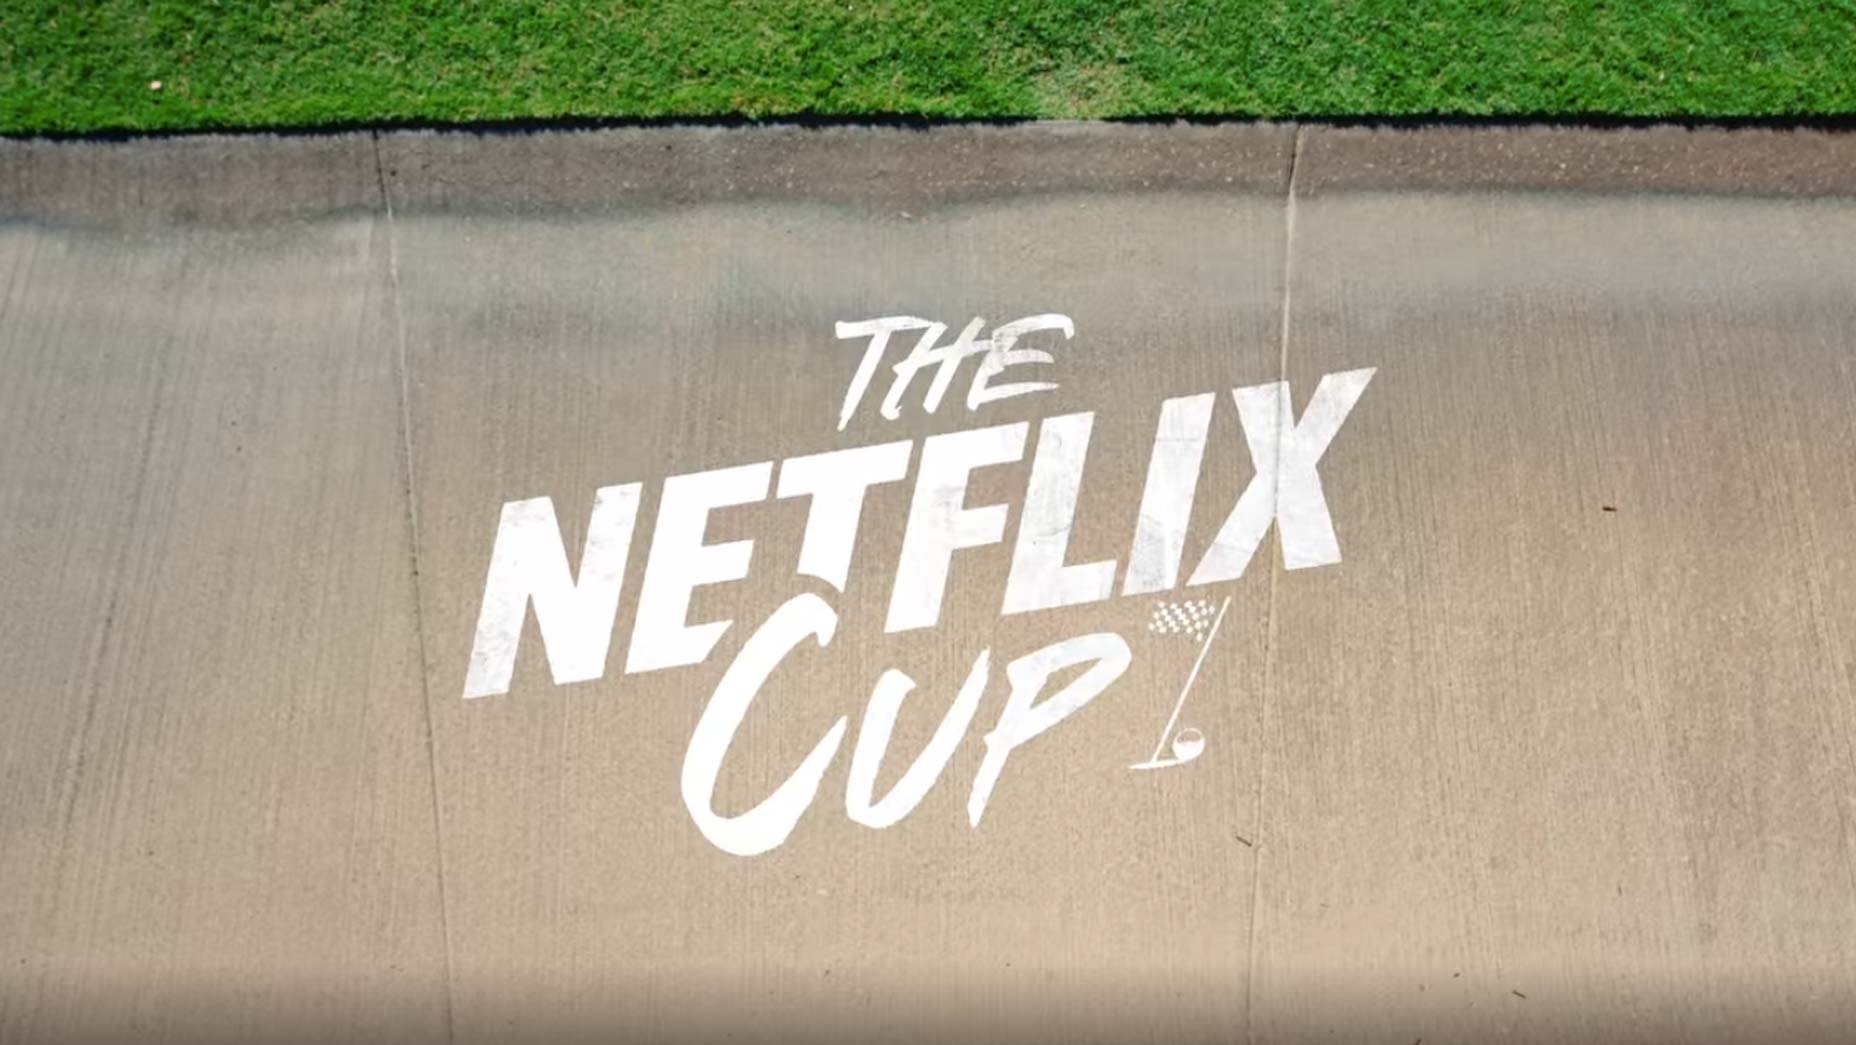 The Netflix Cup How to watch Formula 1 vs. PGA Tour in Vegas